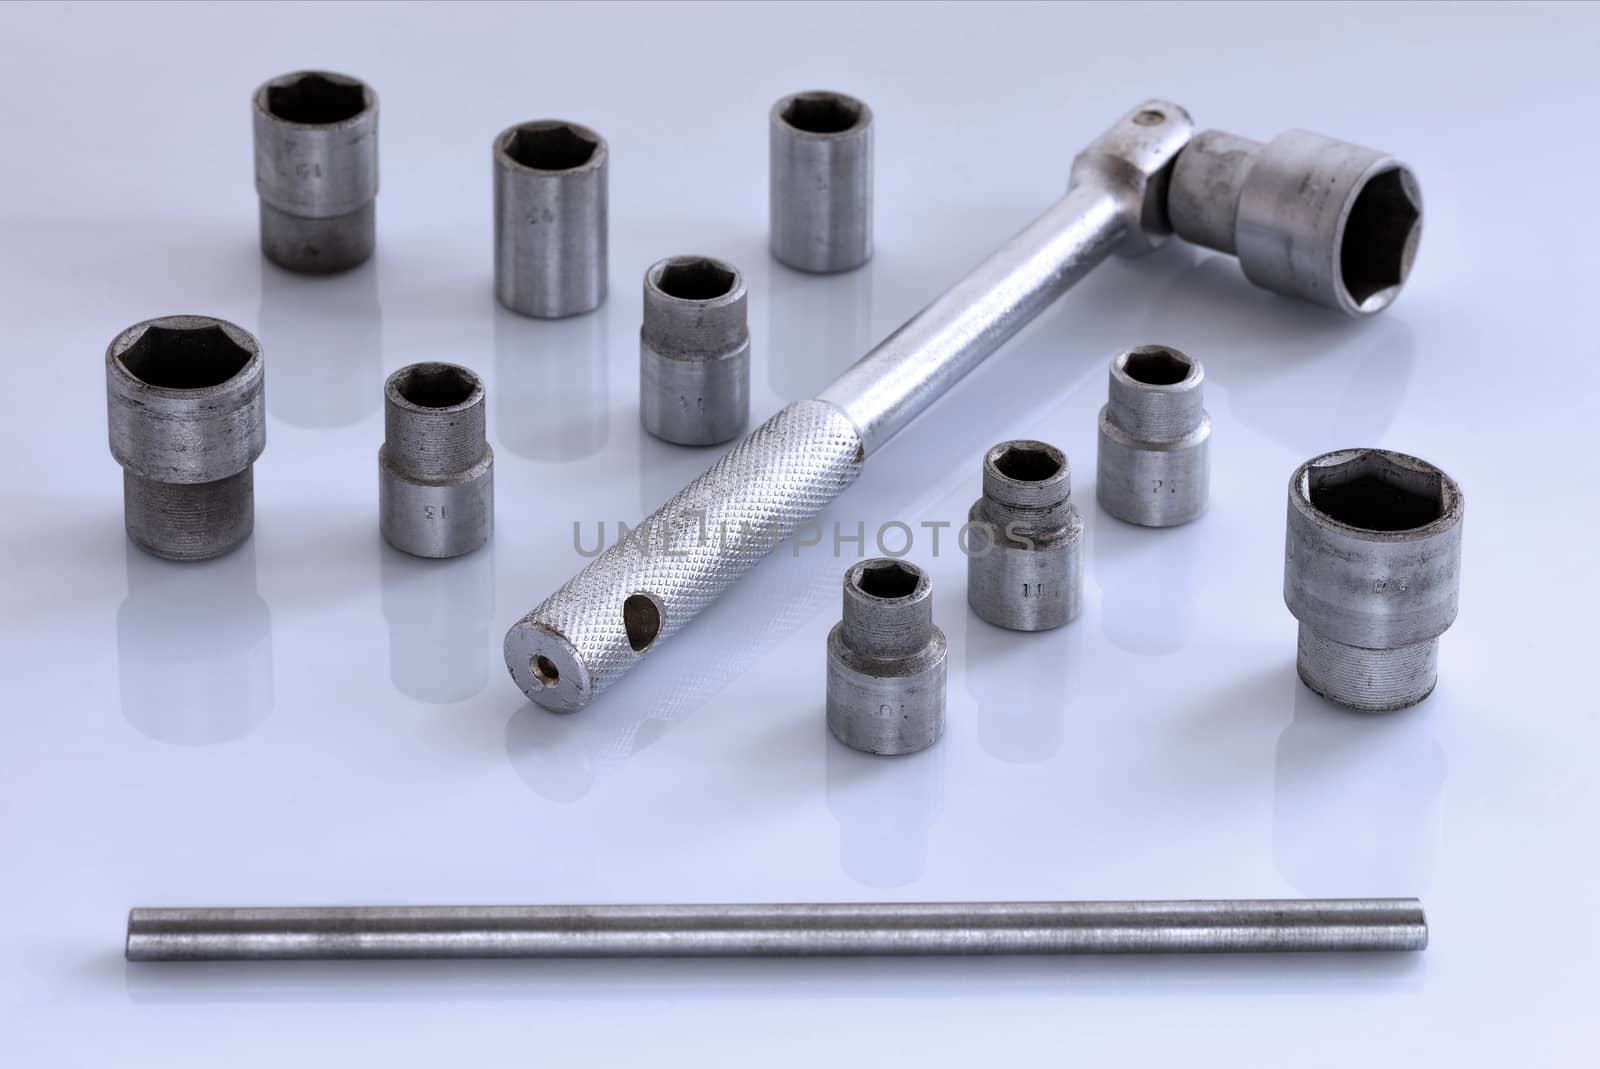 A universal set of tool heads with a ratchet for the car in on a glossy light gray background, close-up.